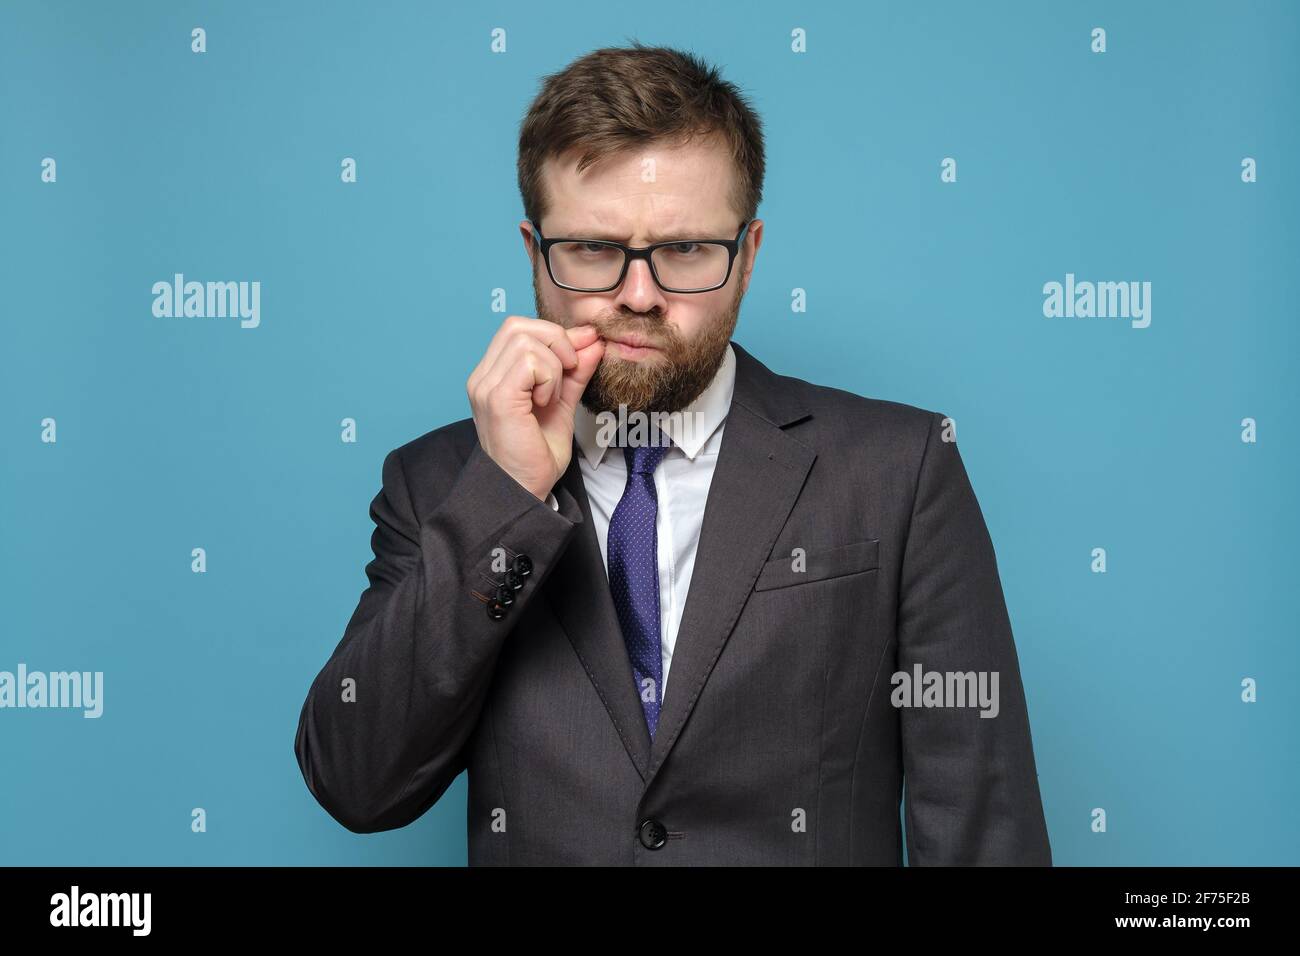 Suspicious Caucasian man in business suit, sternly and suspiciously looks, touching mustache with hands. Blue background. Stock Photo